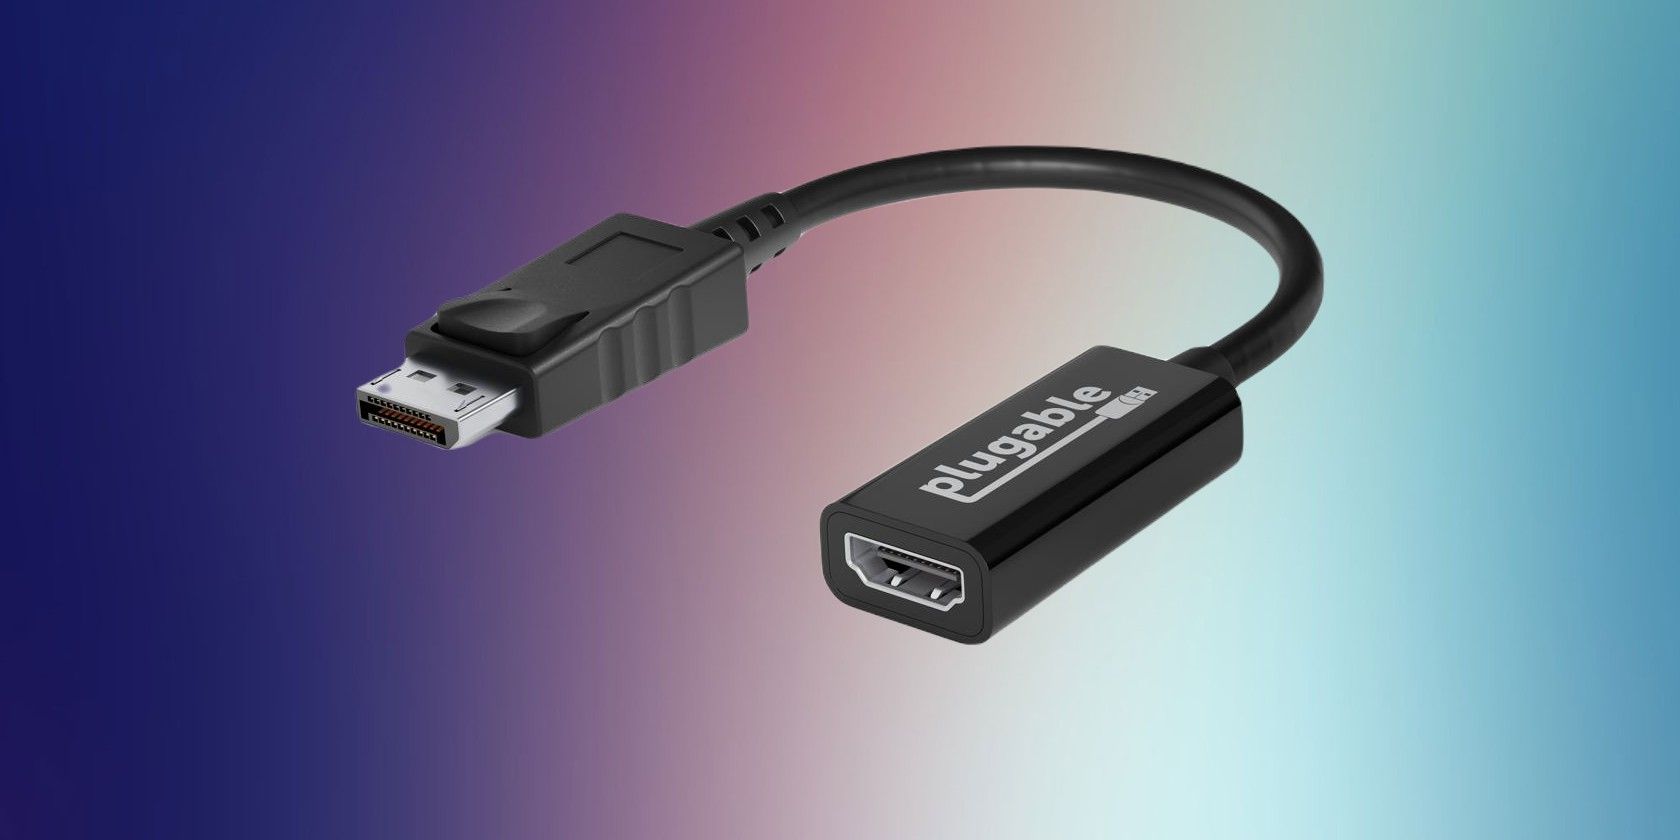 At first learn Privileged The 7 Best DisplayPort to HDMI Adapters